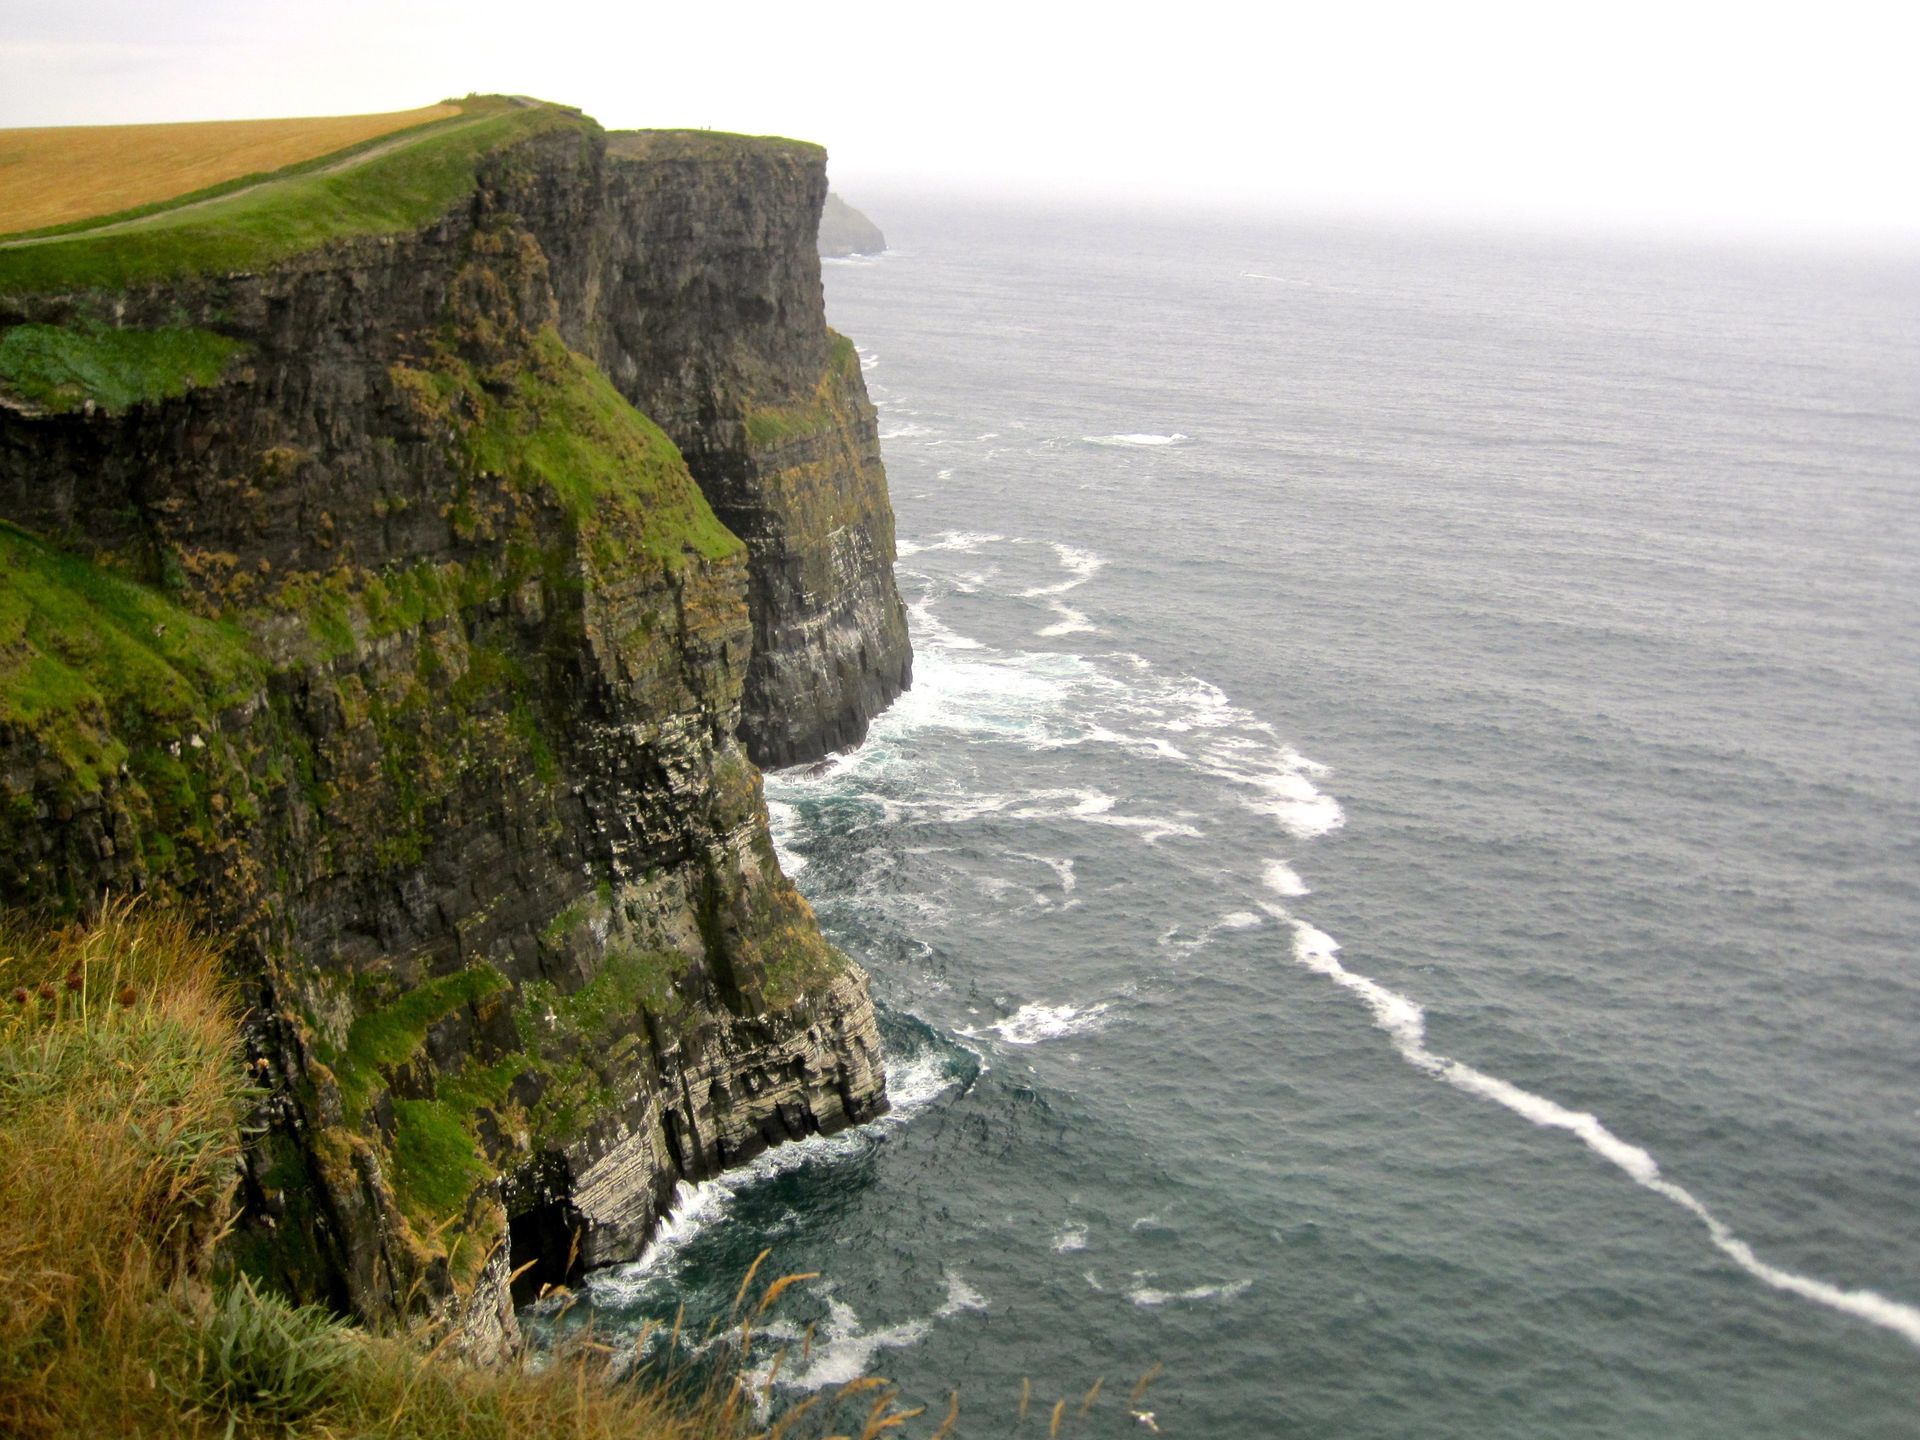 The Cliffs of Moher in Ireland.